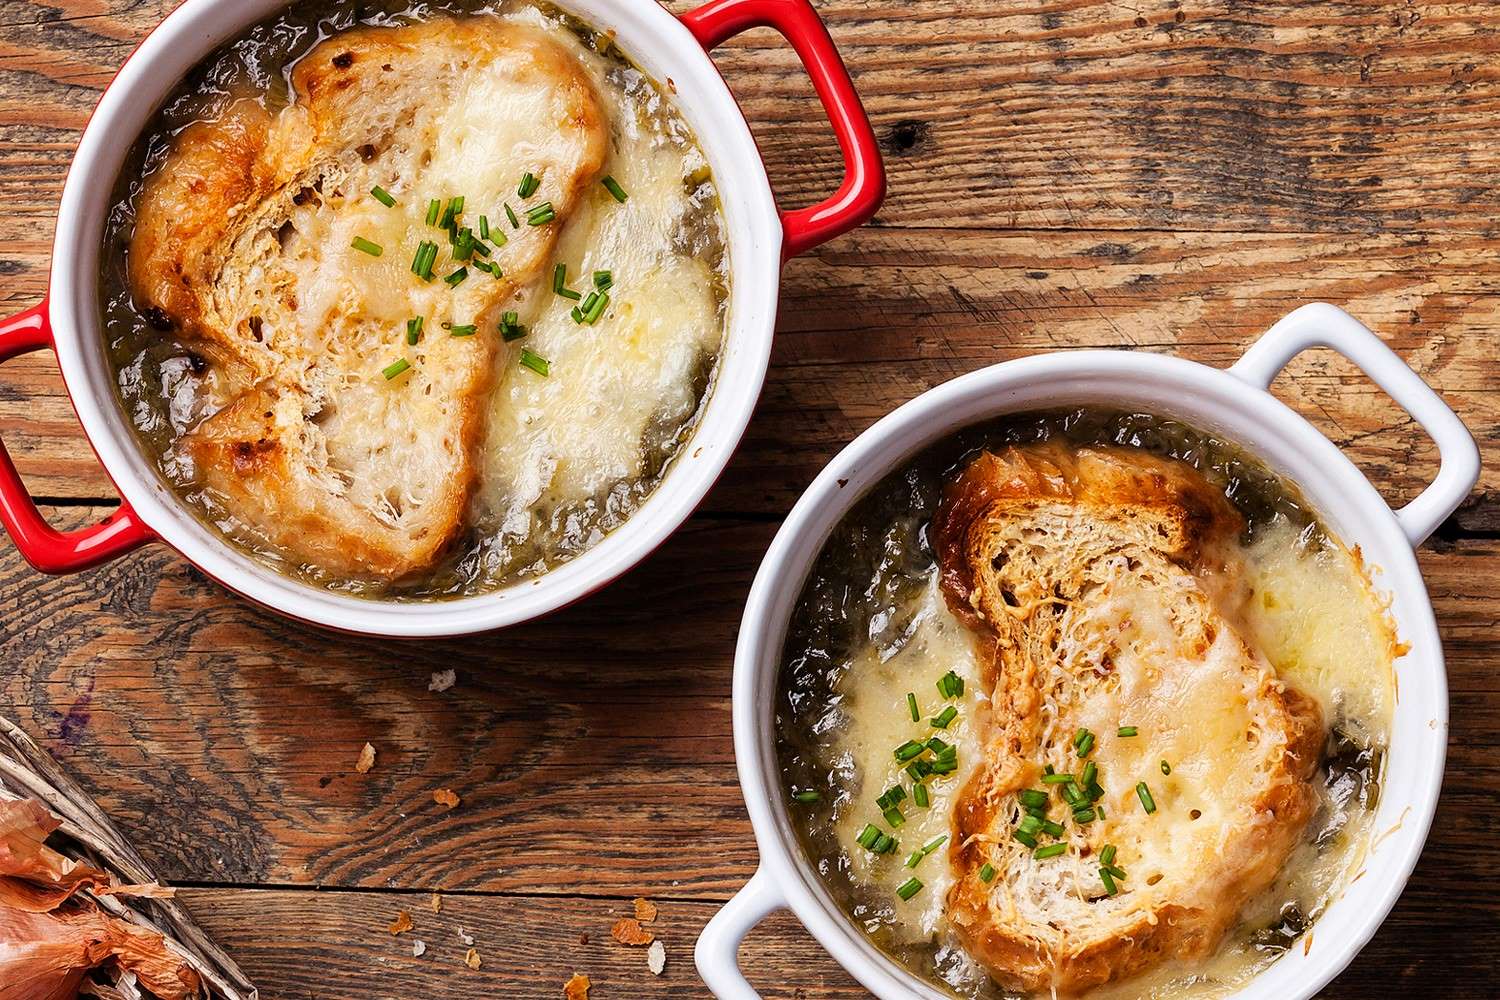 https://learn.surlatable.com/wp-content/uploads/2023/03/French-Onion-Soup.jpg